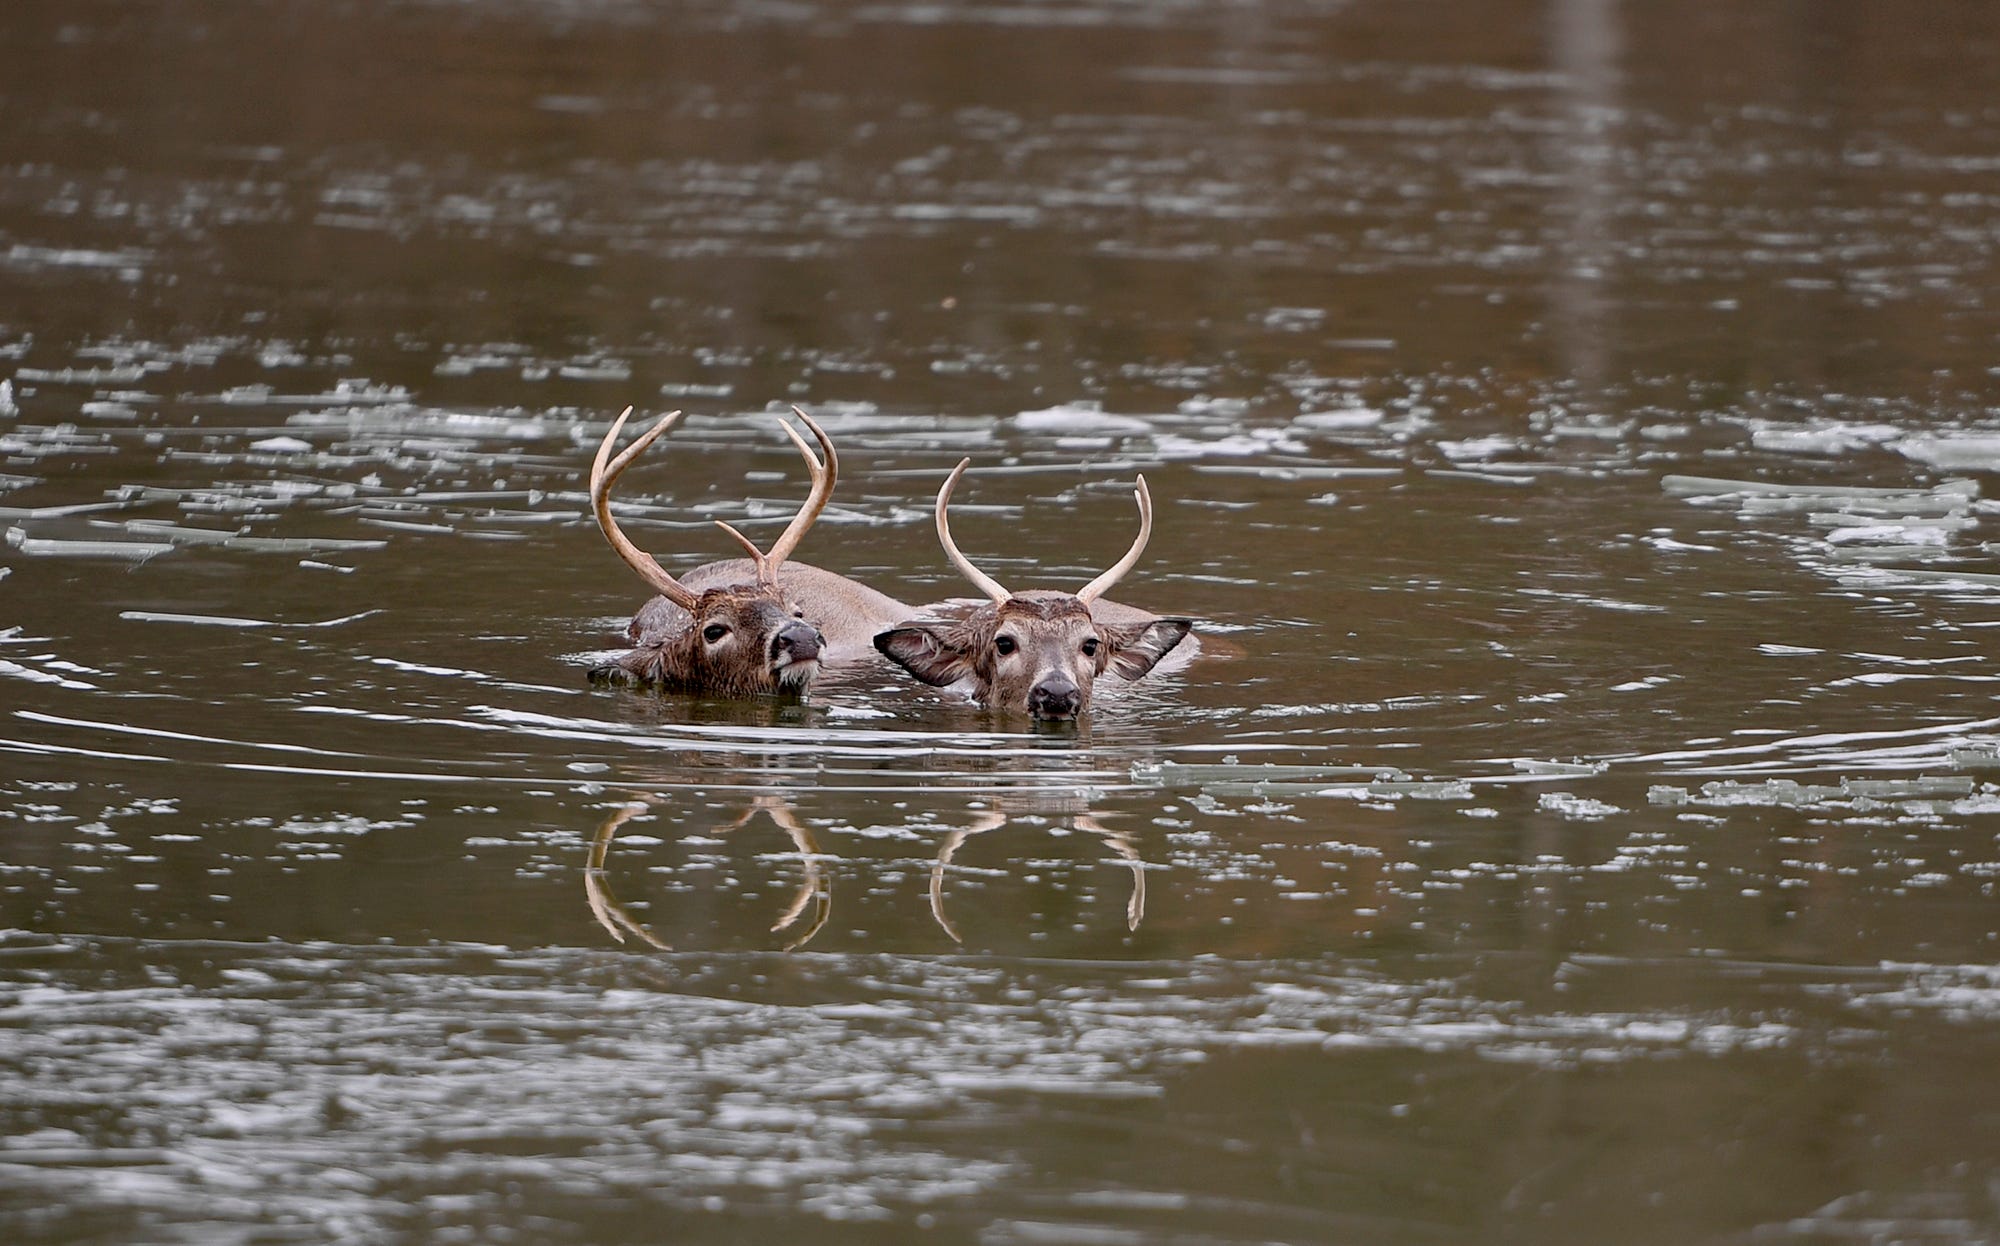 Two whitetail buck struggle after falling through the ice at Gifford Pinchot State Park, Saturday, January 11, 2019. With the help of park officials, who broke up the ice, the two deer eventually made it to shore.
John A. Pavoncello photo